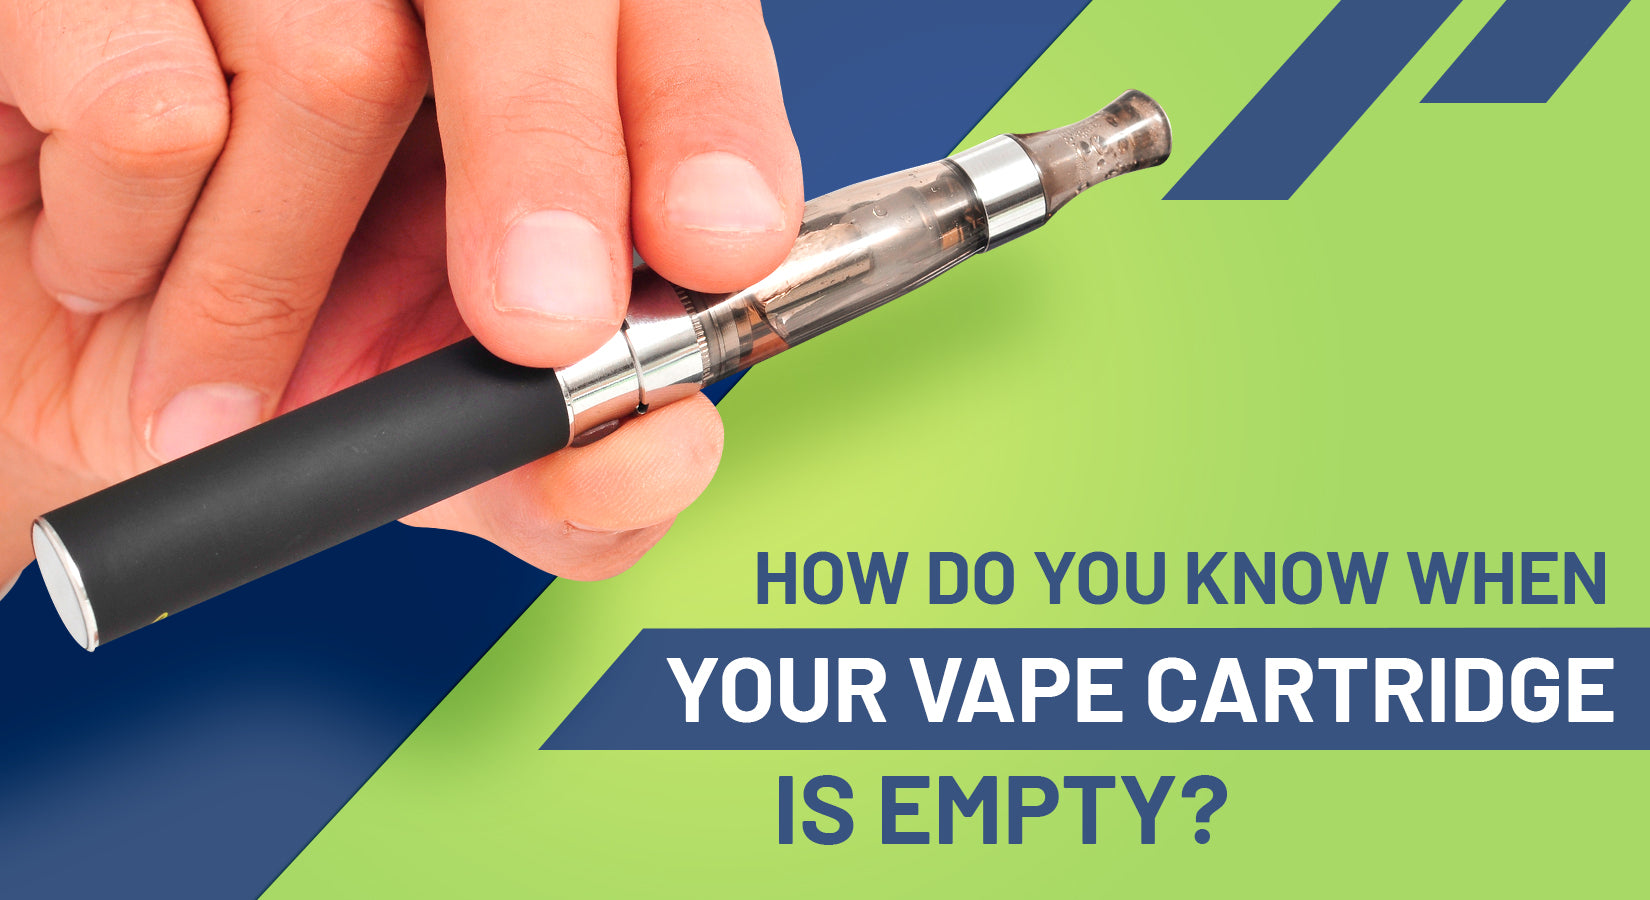 How Do You Know When Your Vape Cartridge is Empty?